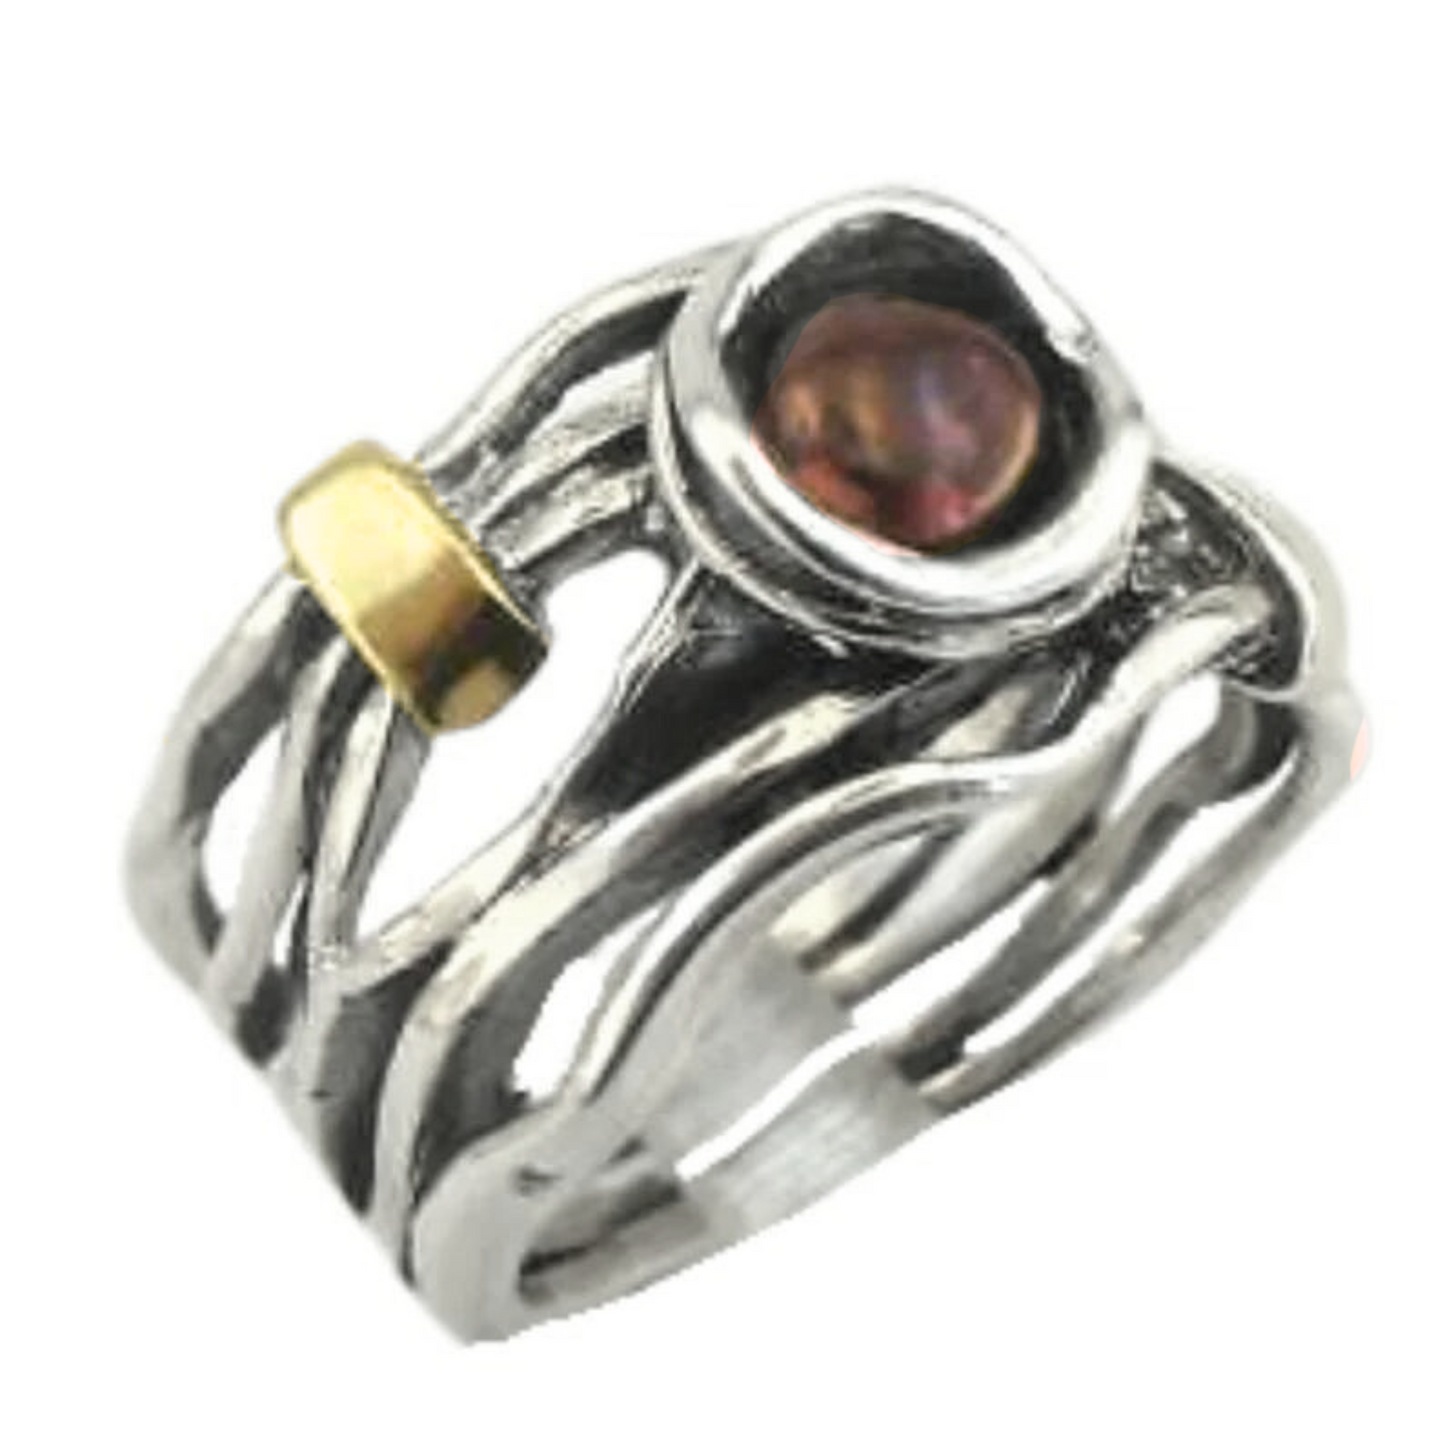 Wide Sterling Silver Garnet Ring with Gold